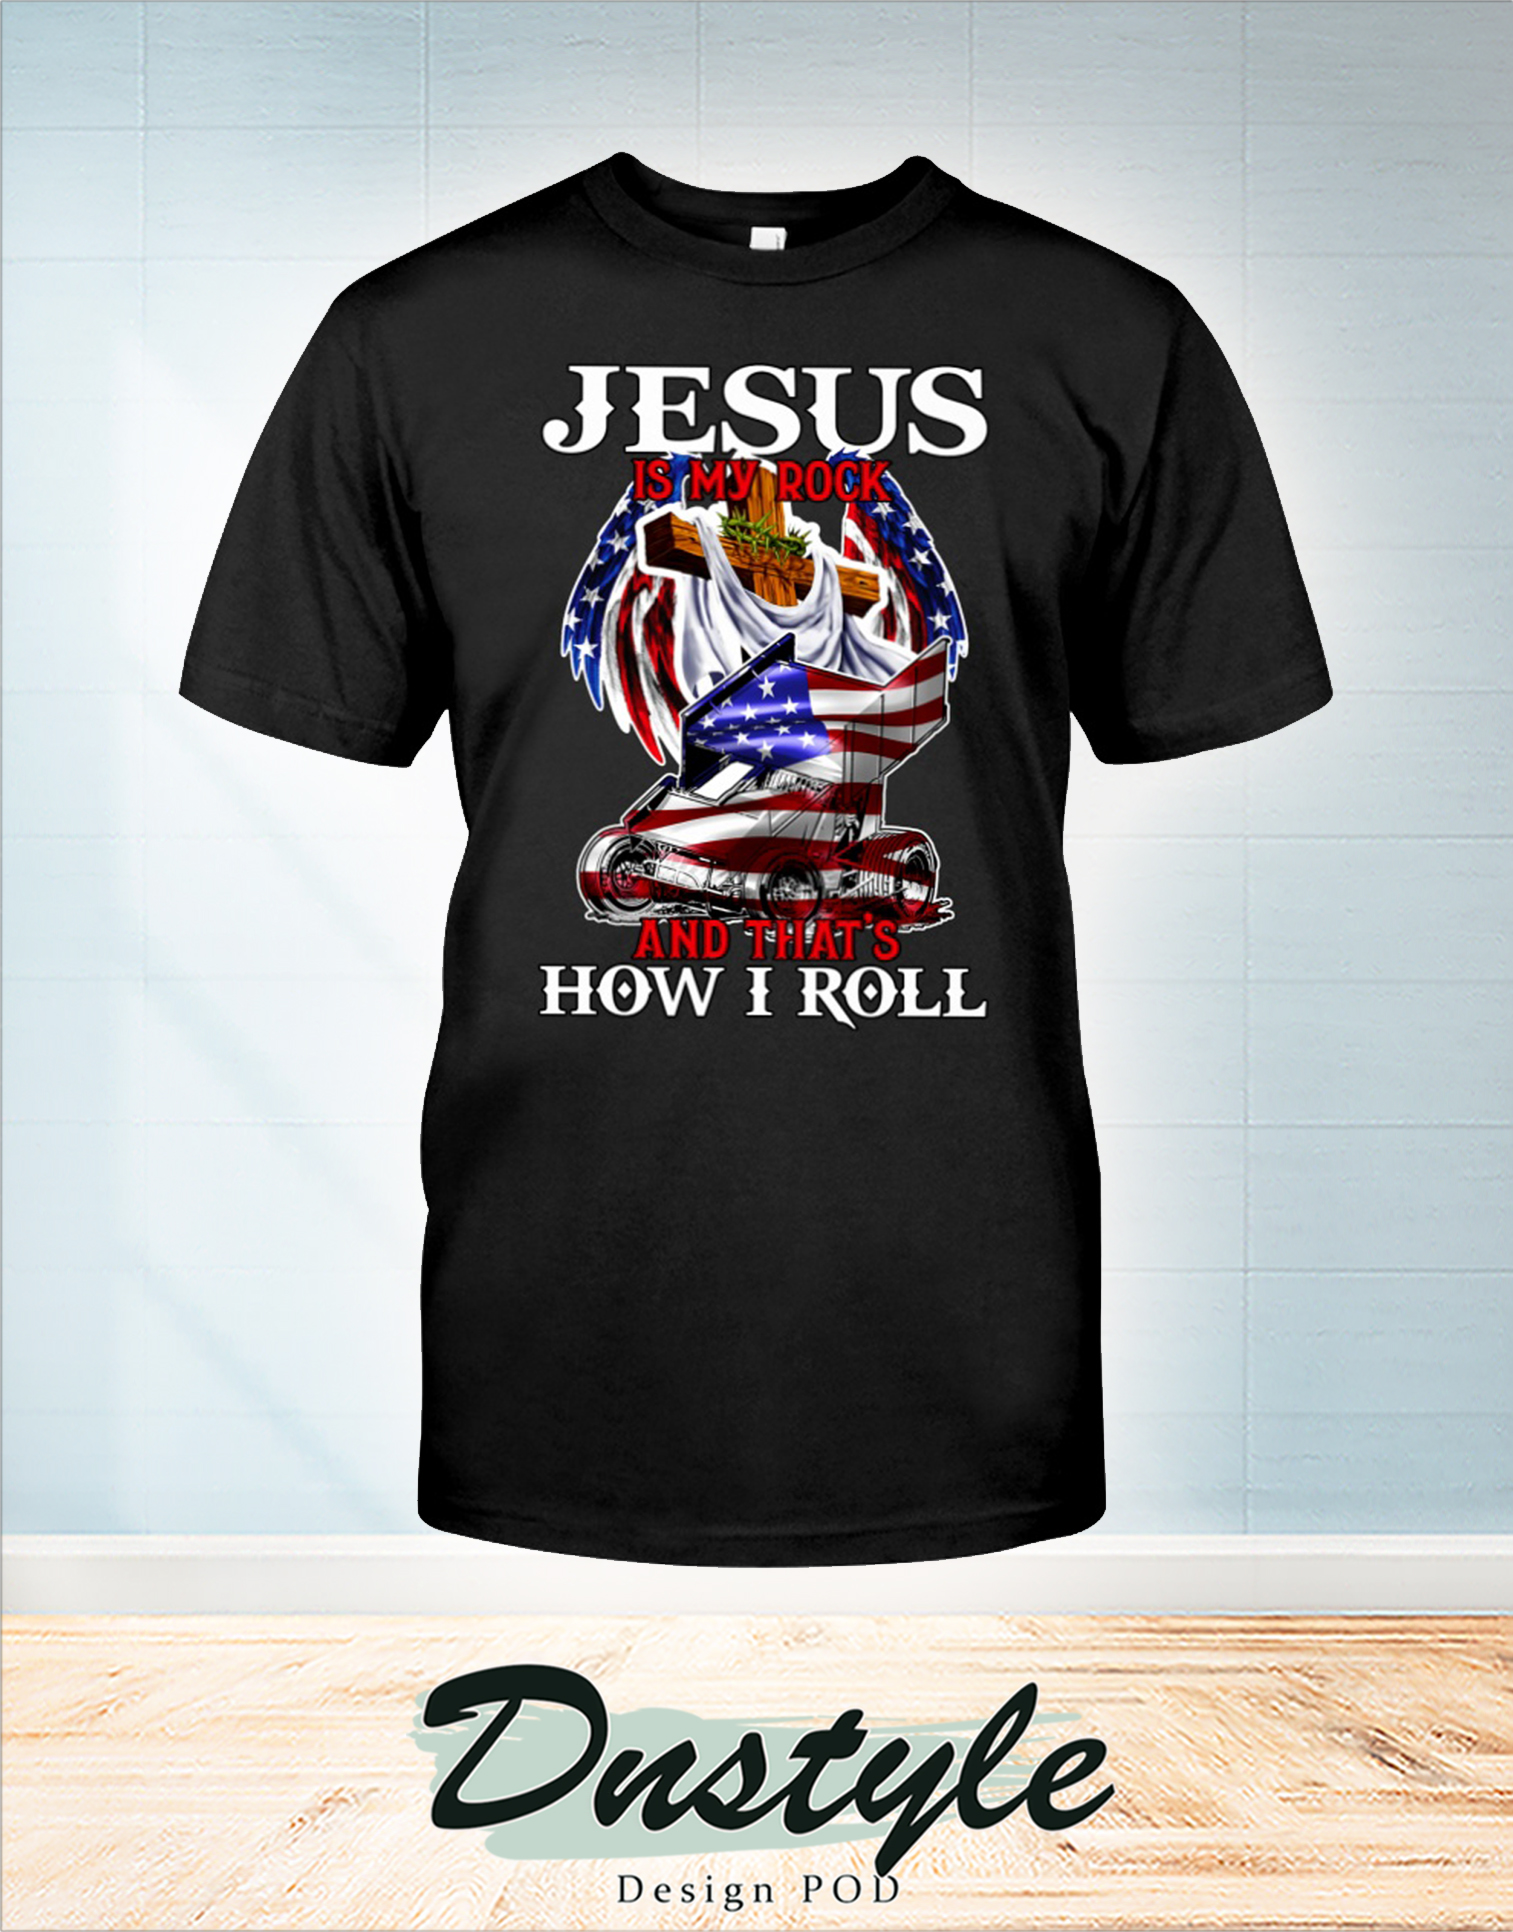 Sprint car jesus is my rock and that's how I roll t-shirt